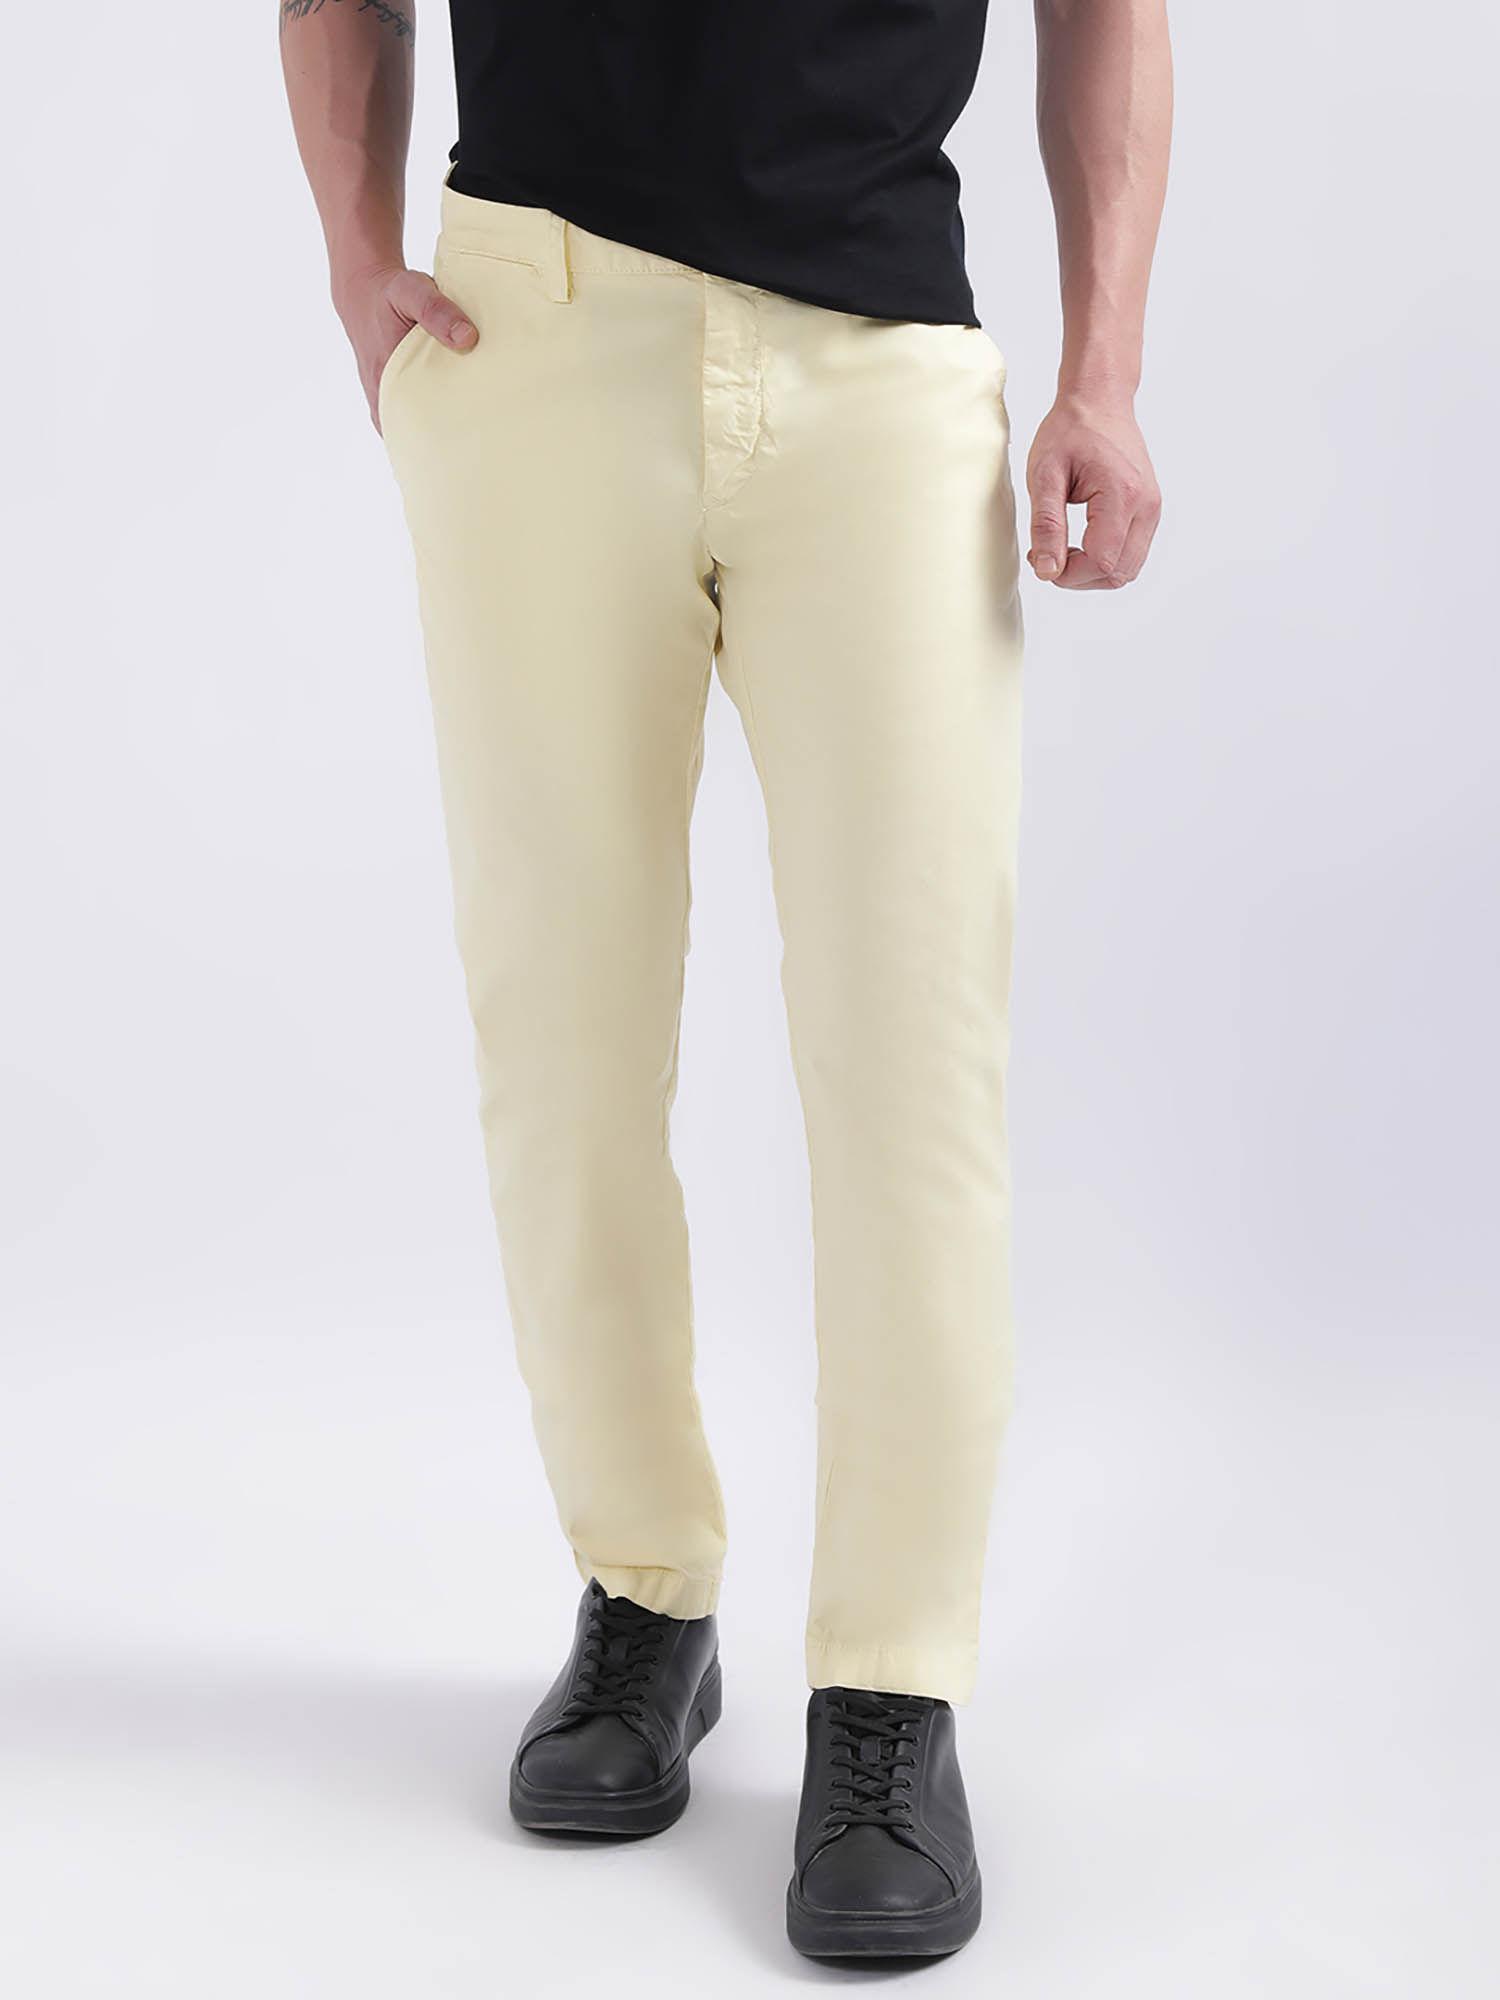 mens solid yellow trouser